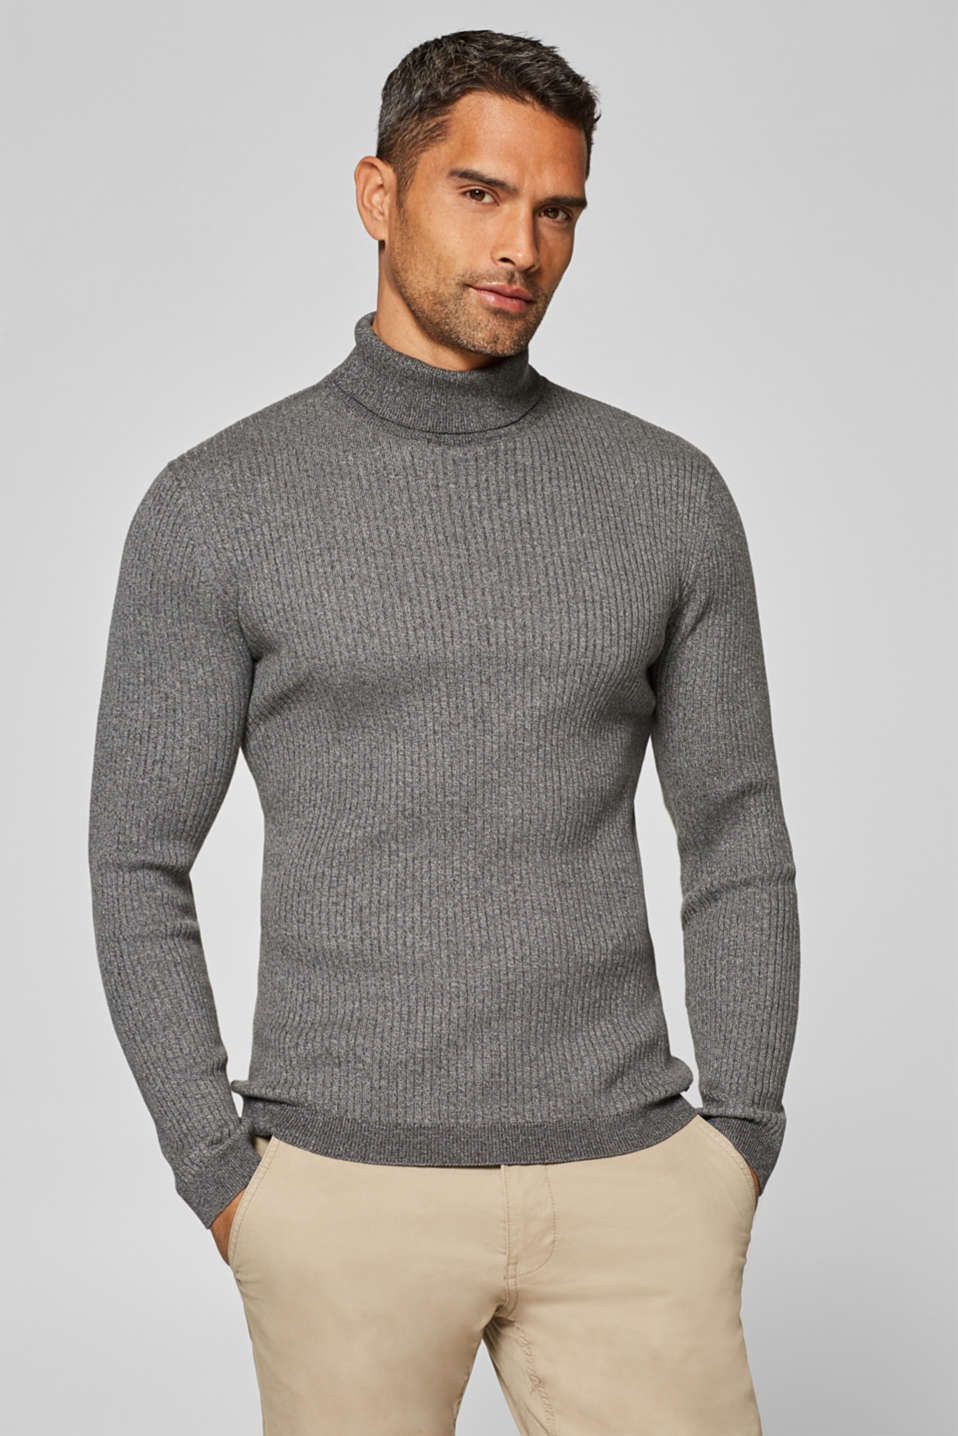 edc - Muscle-fit jumper with a polo neck, 100% cotton at our Online Shop